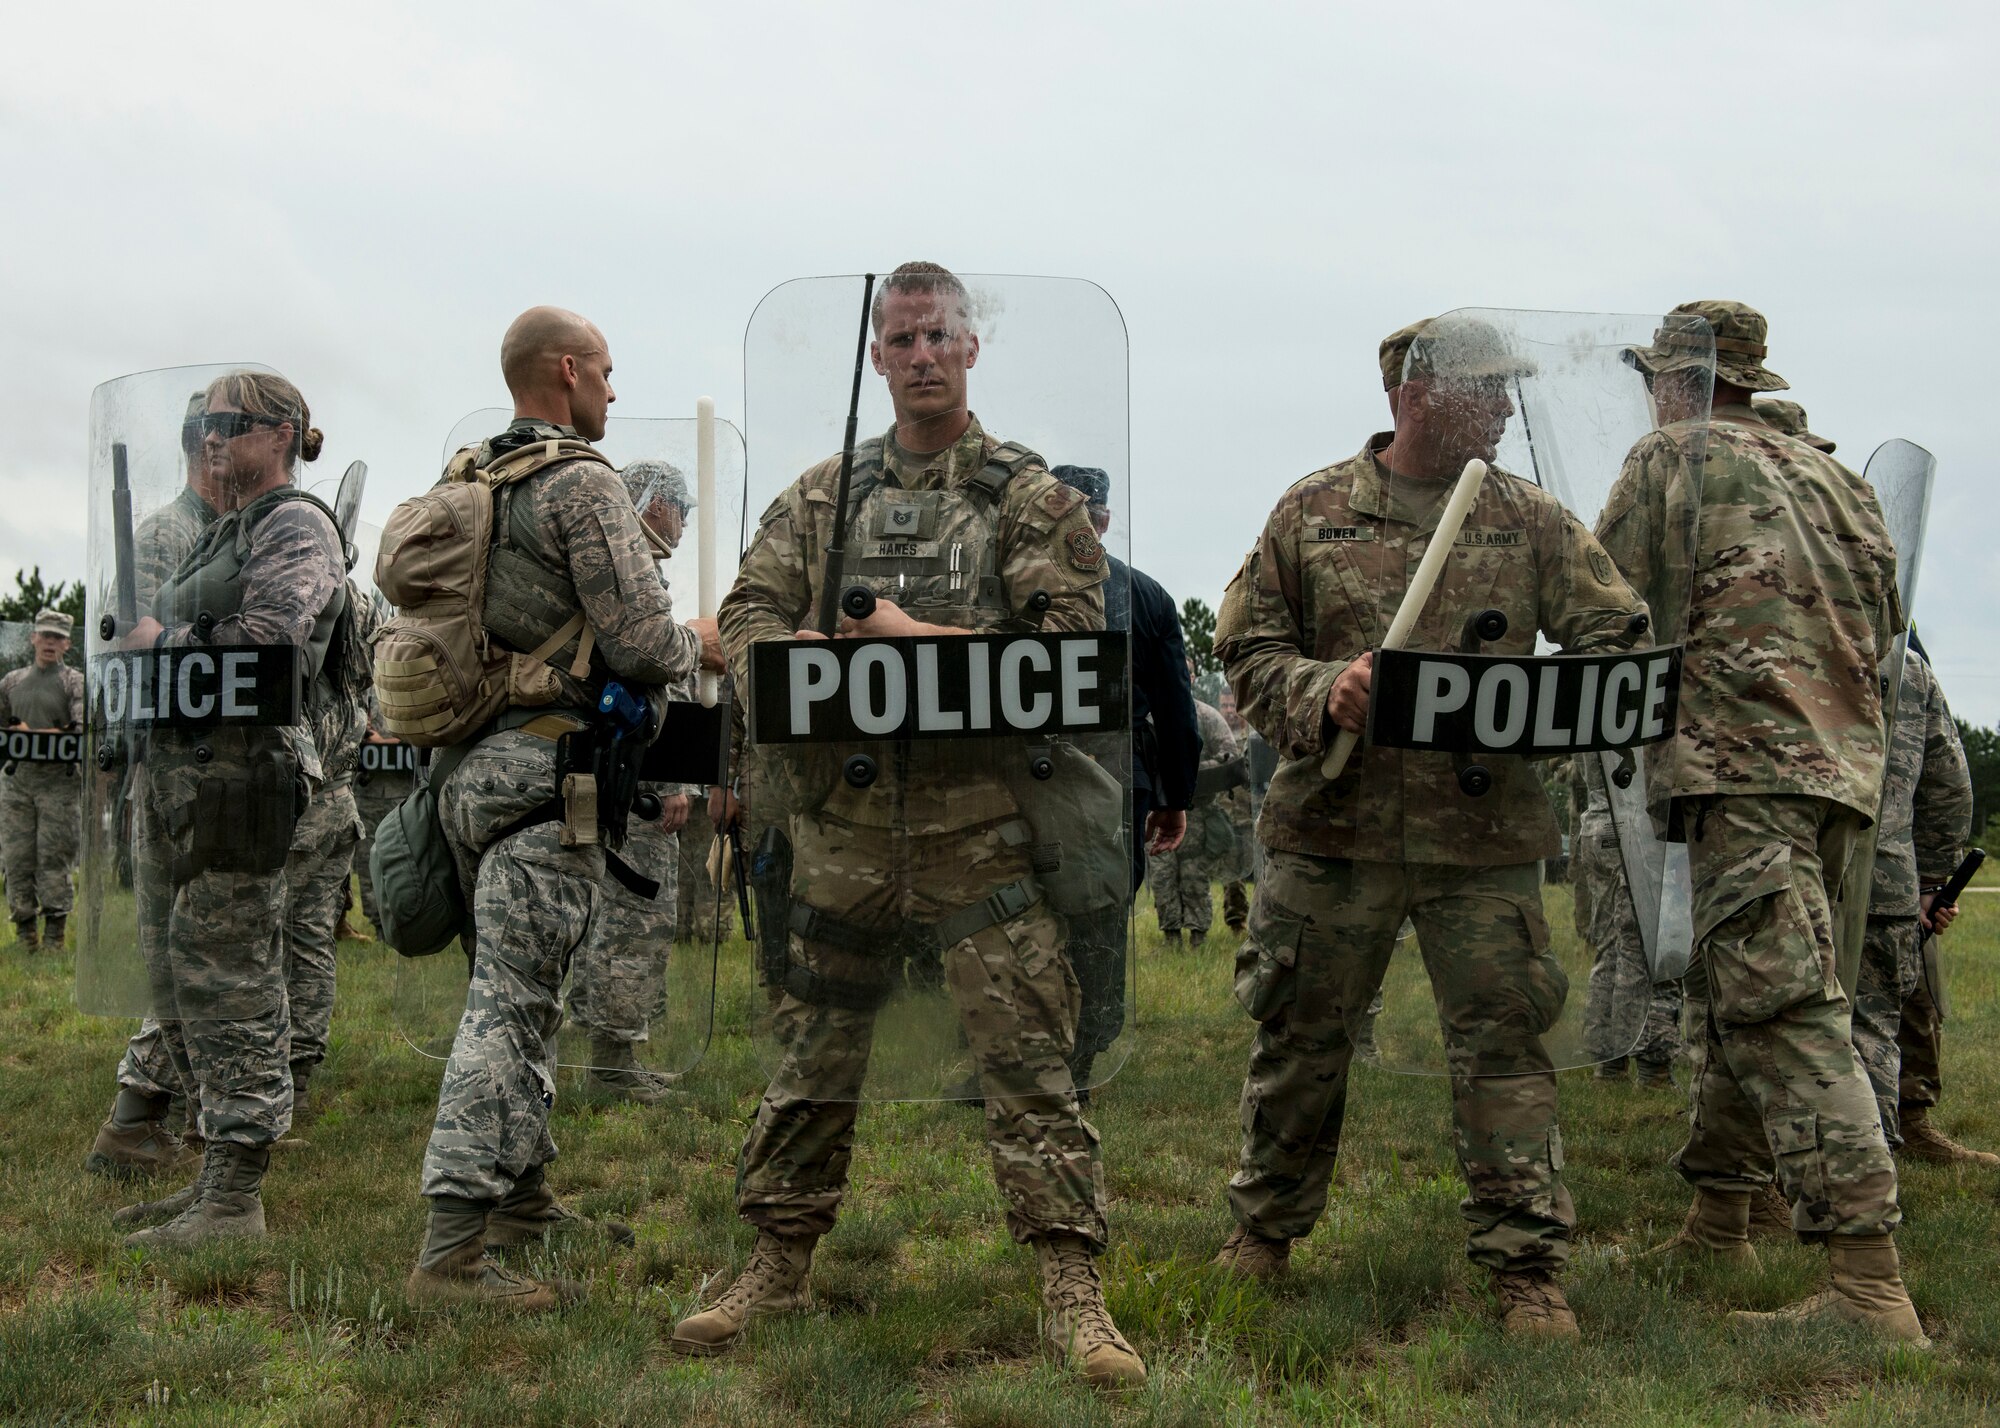 National Guardsmen assigned to the New Hampshire Army National Guard and the New Hampshire and Connecticut  Air National Guard conduct riot control training alongside members of the Wisconsin State Patrol during the PATRIOT North 19 domestic operations exercise, July 18, 2019 at Fort McCoy, WI. PATRIOT North is an annual domestic operations exercise, which tests the ability of the National Guard to work together with local, state and federal entities to respond to emergencies. (U.S. Air National Guard photo by Tech. Sgt. Tamara R. Dabney)